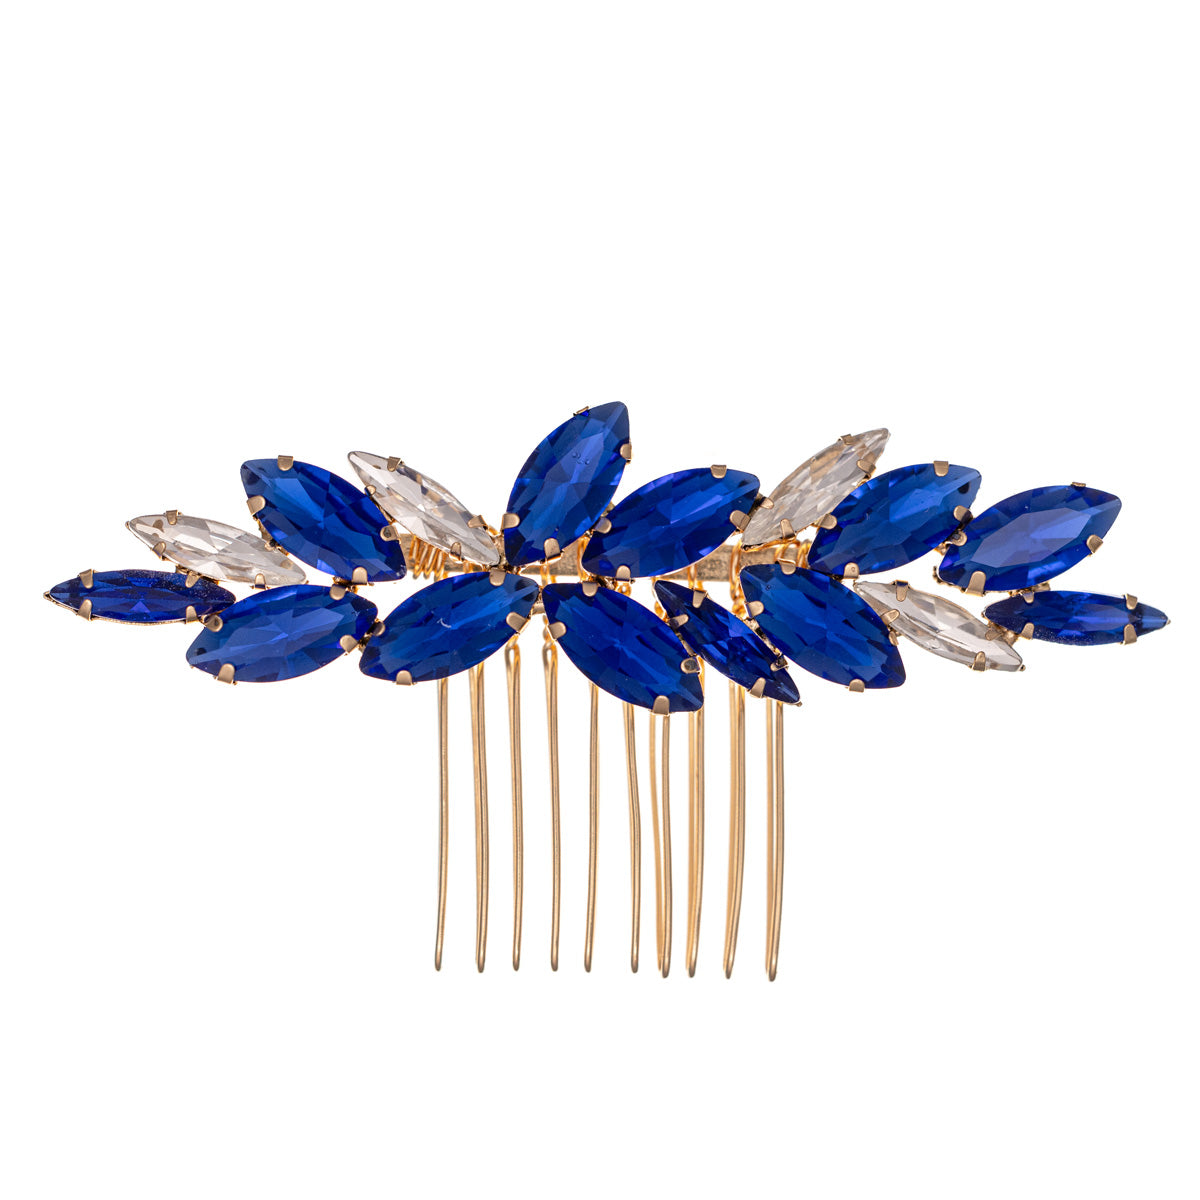 Decorative side comb hairband with strands of stones (8,5cm x 4,3cm)